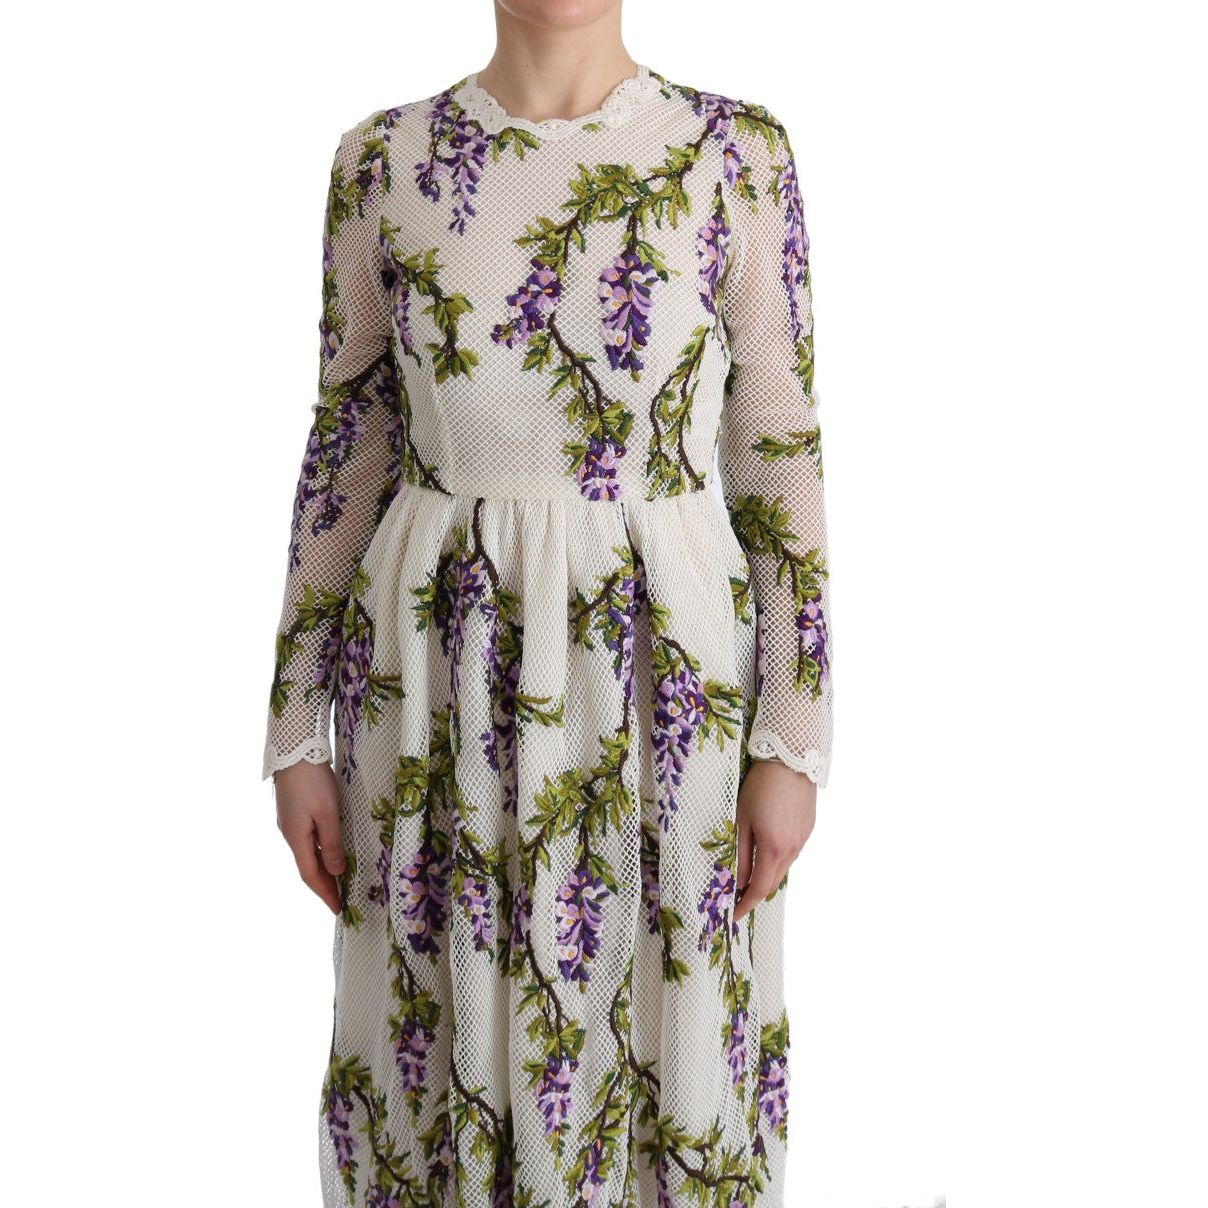 Dolce & Gabbana Elegant Maxi A-line Long Sleeve Dress white-floral-embroidered-maxi-dress